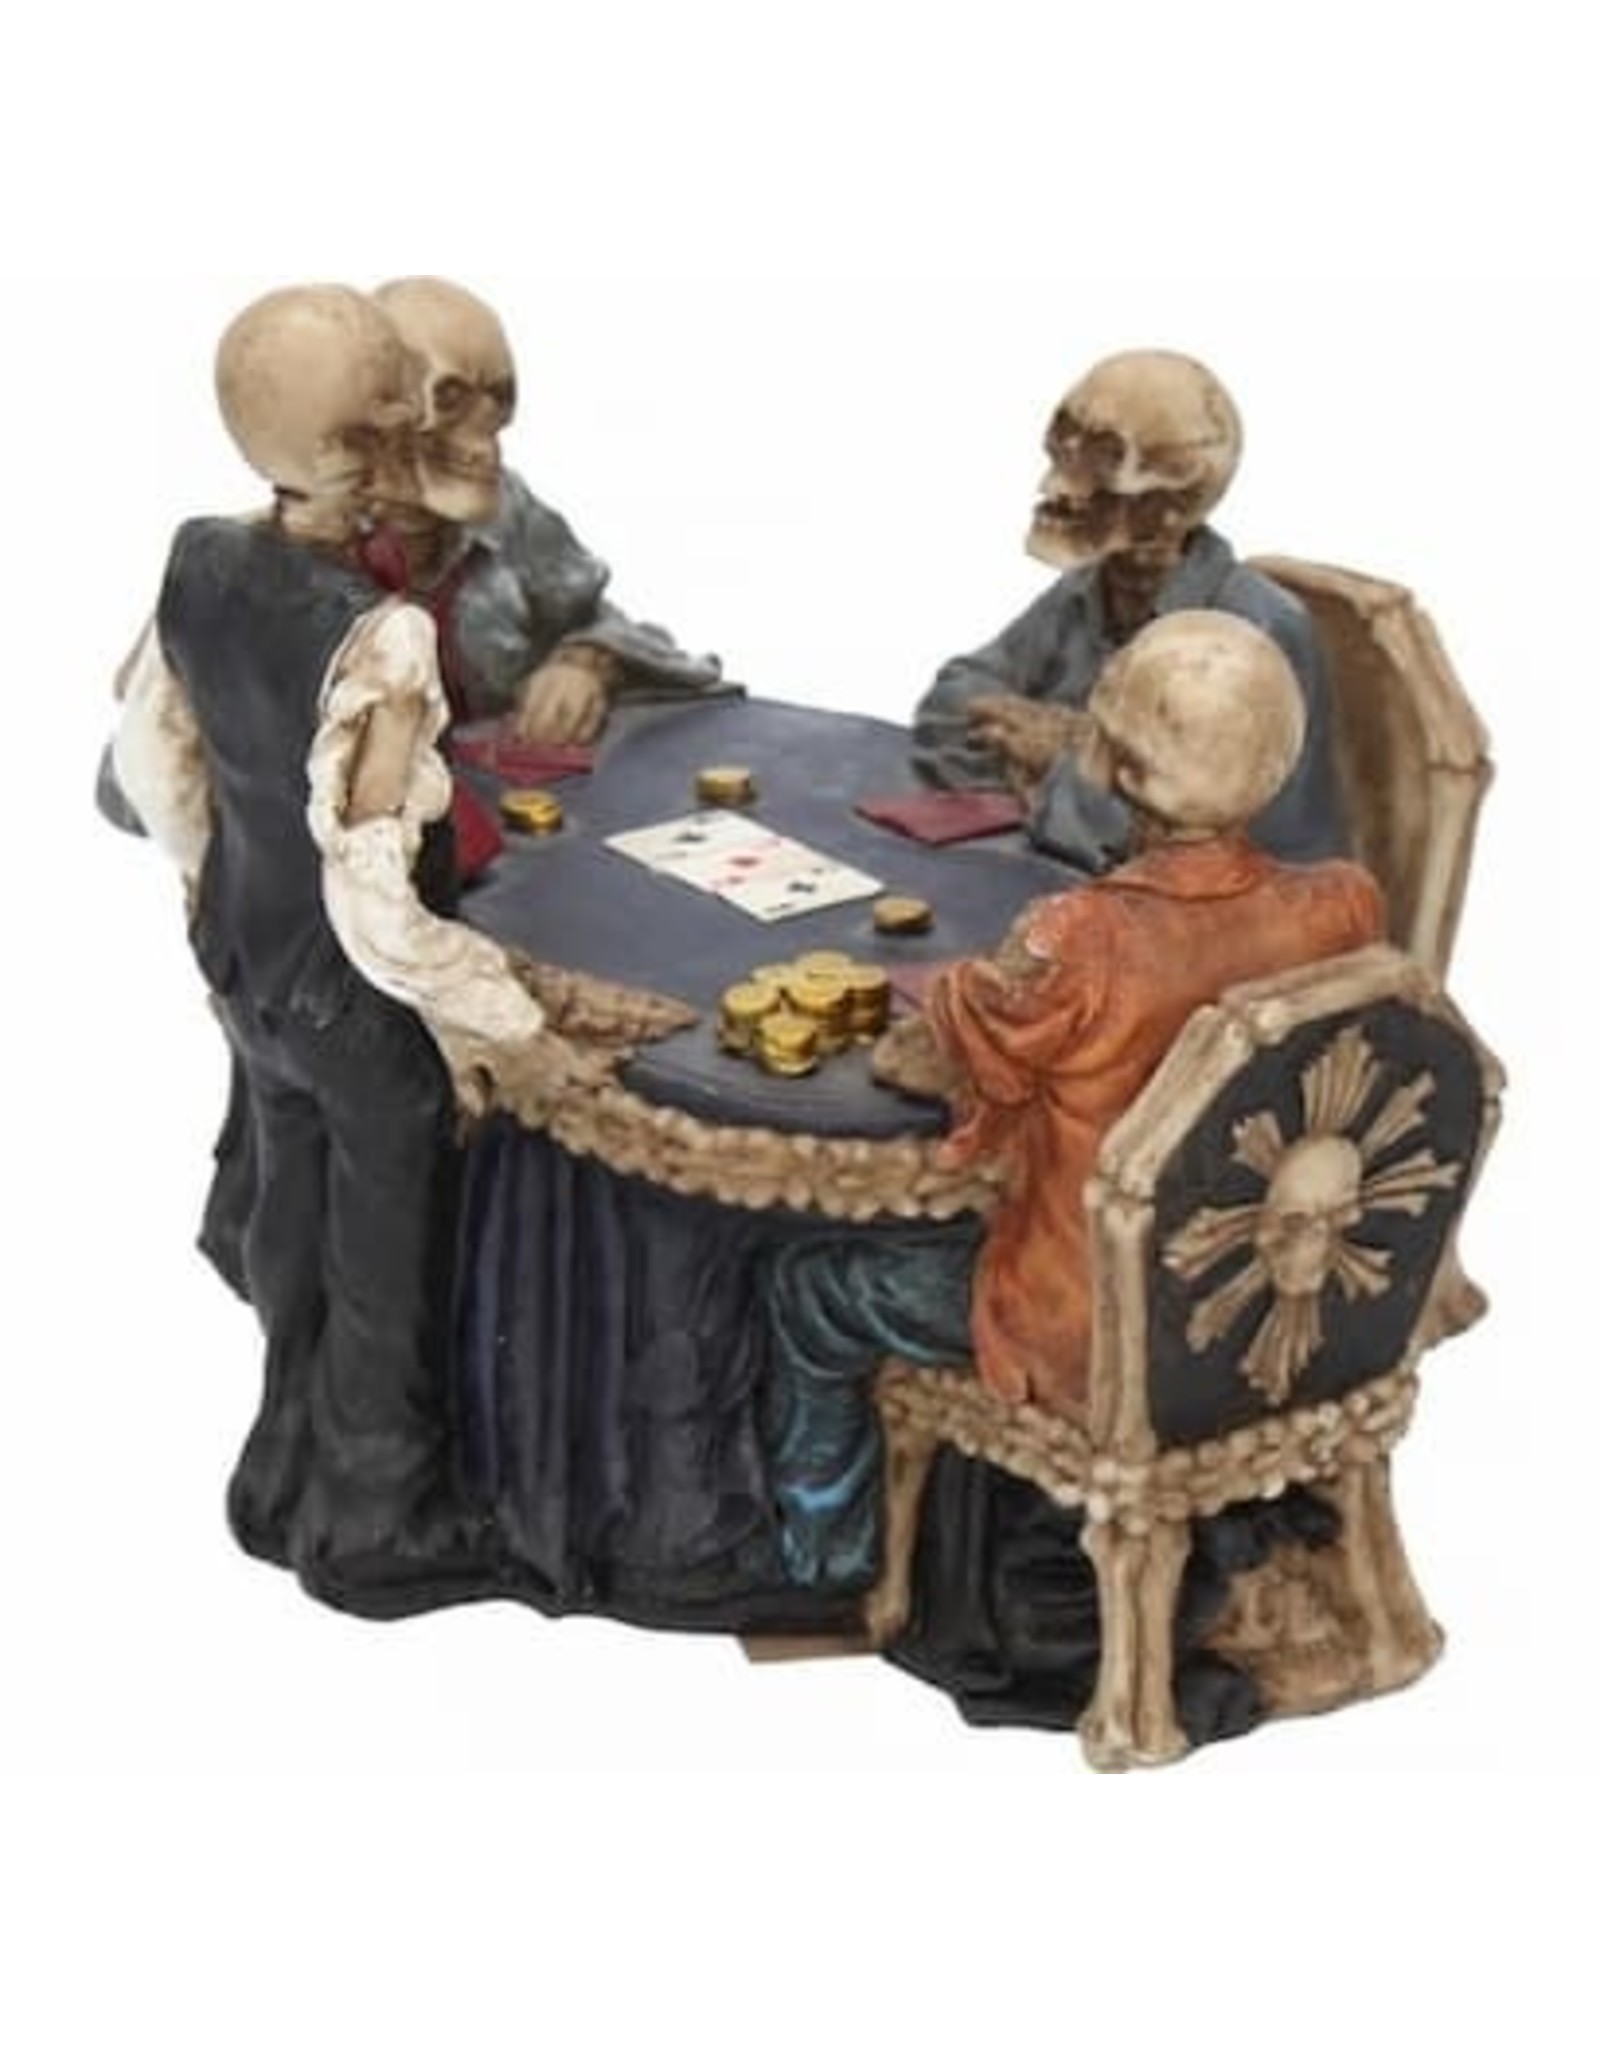 NemesisNow Collectables - Poker table with Skeletons End Game Nemesis Now